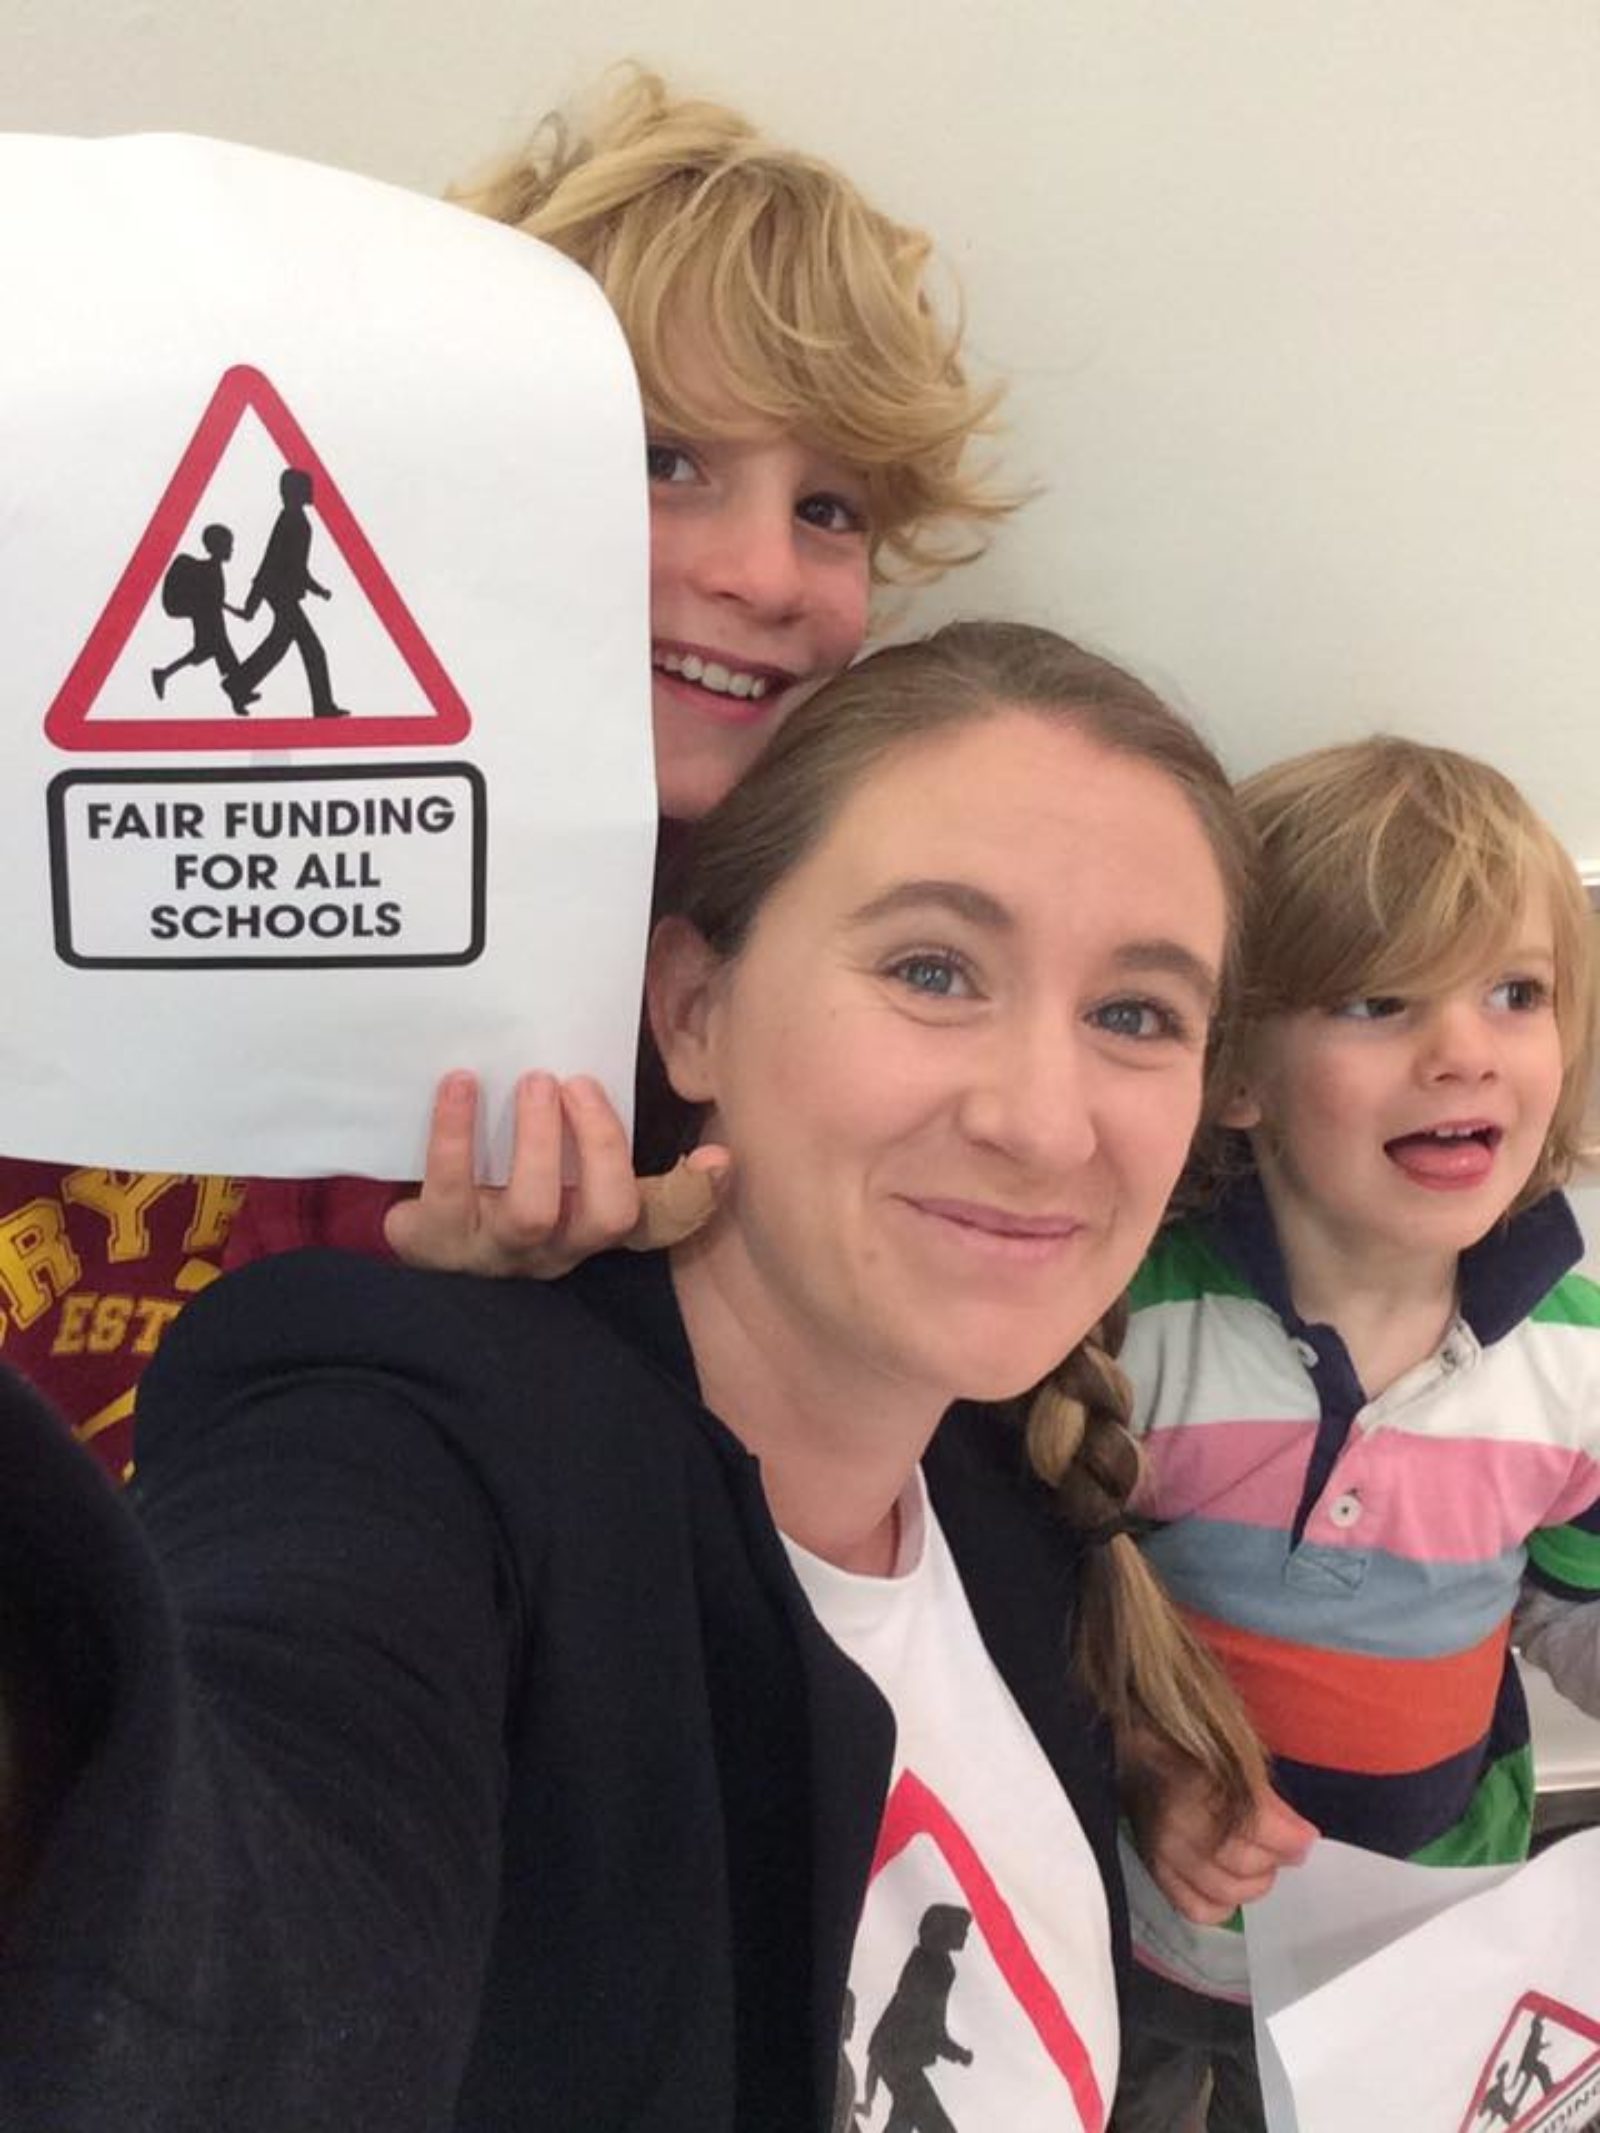 Siobhan Strode - Campaigning For Fairer Funding for Schools